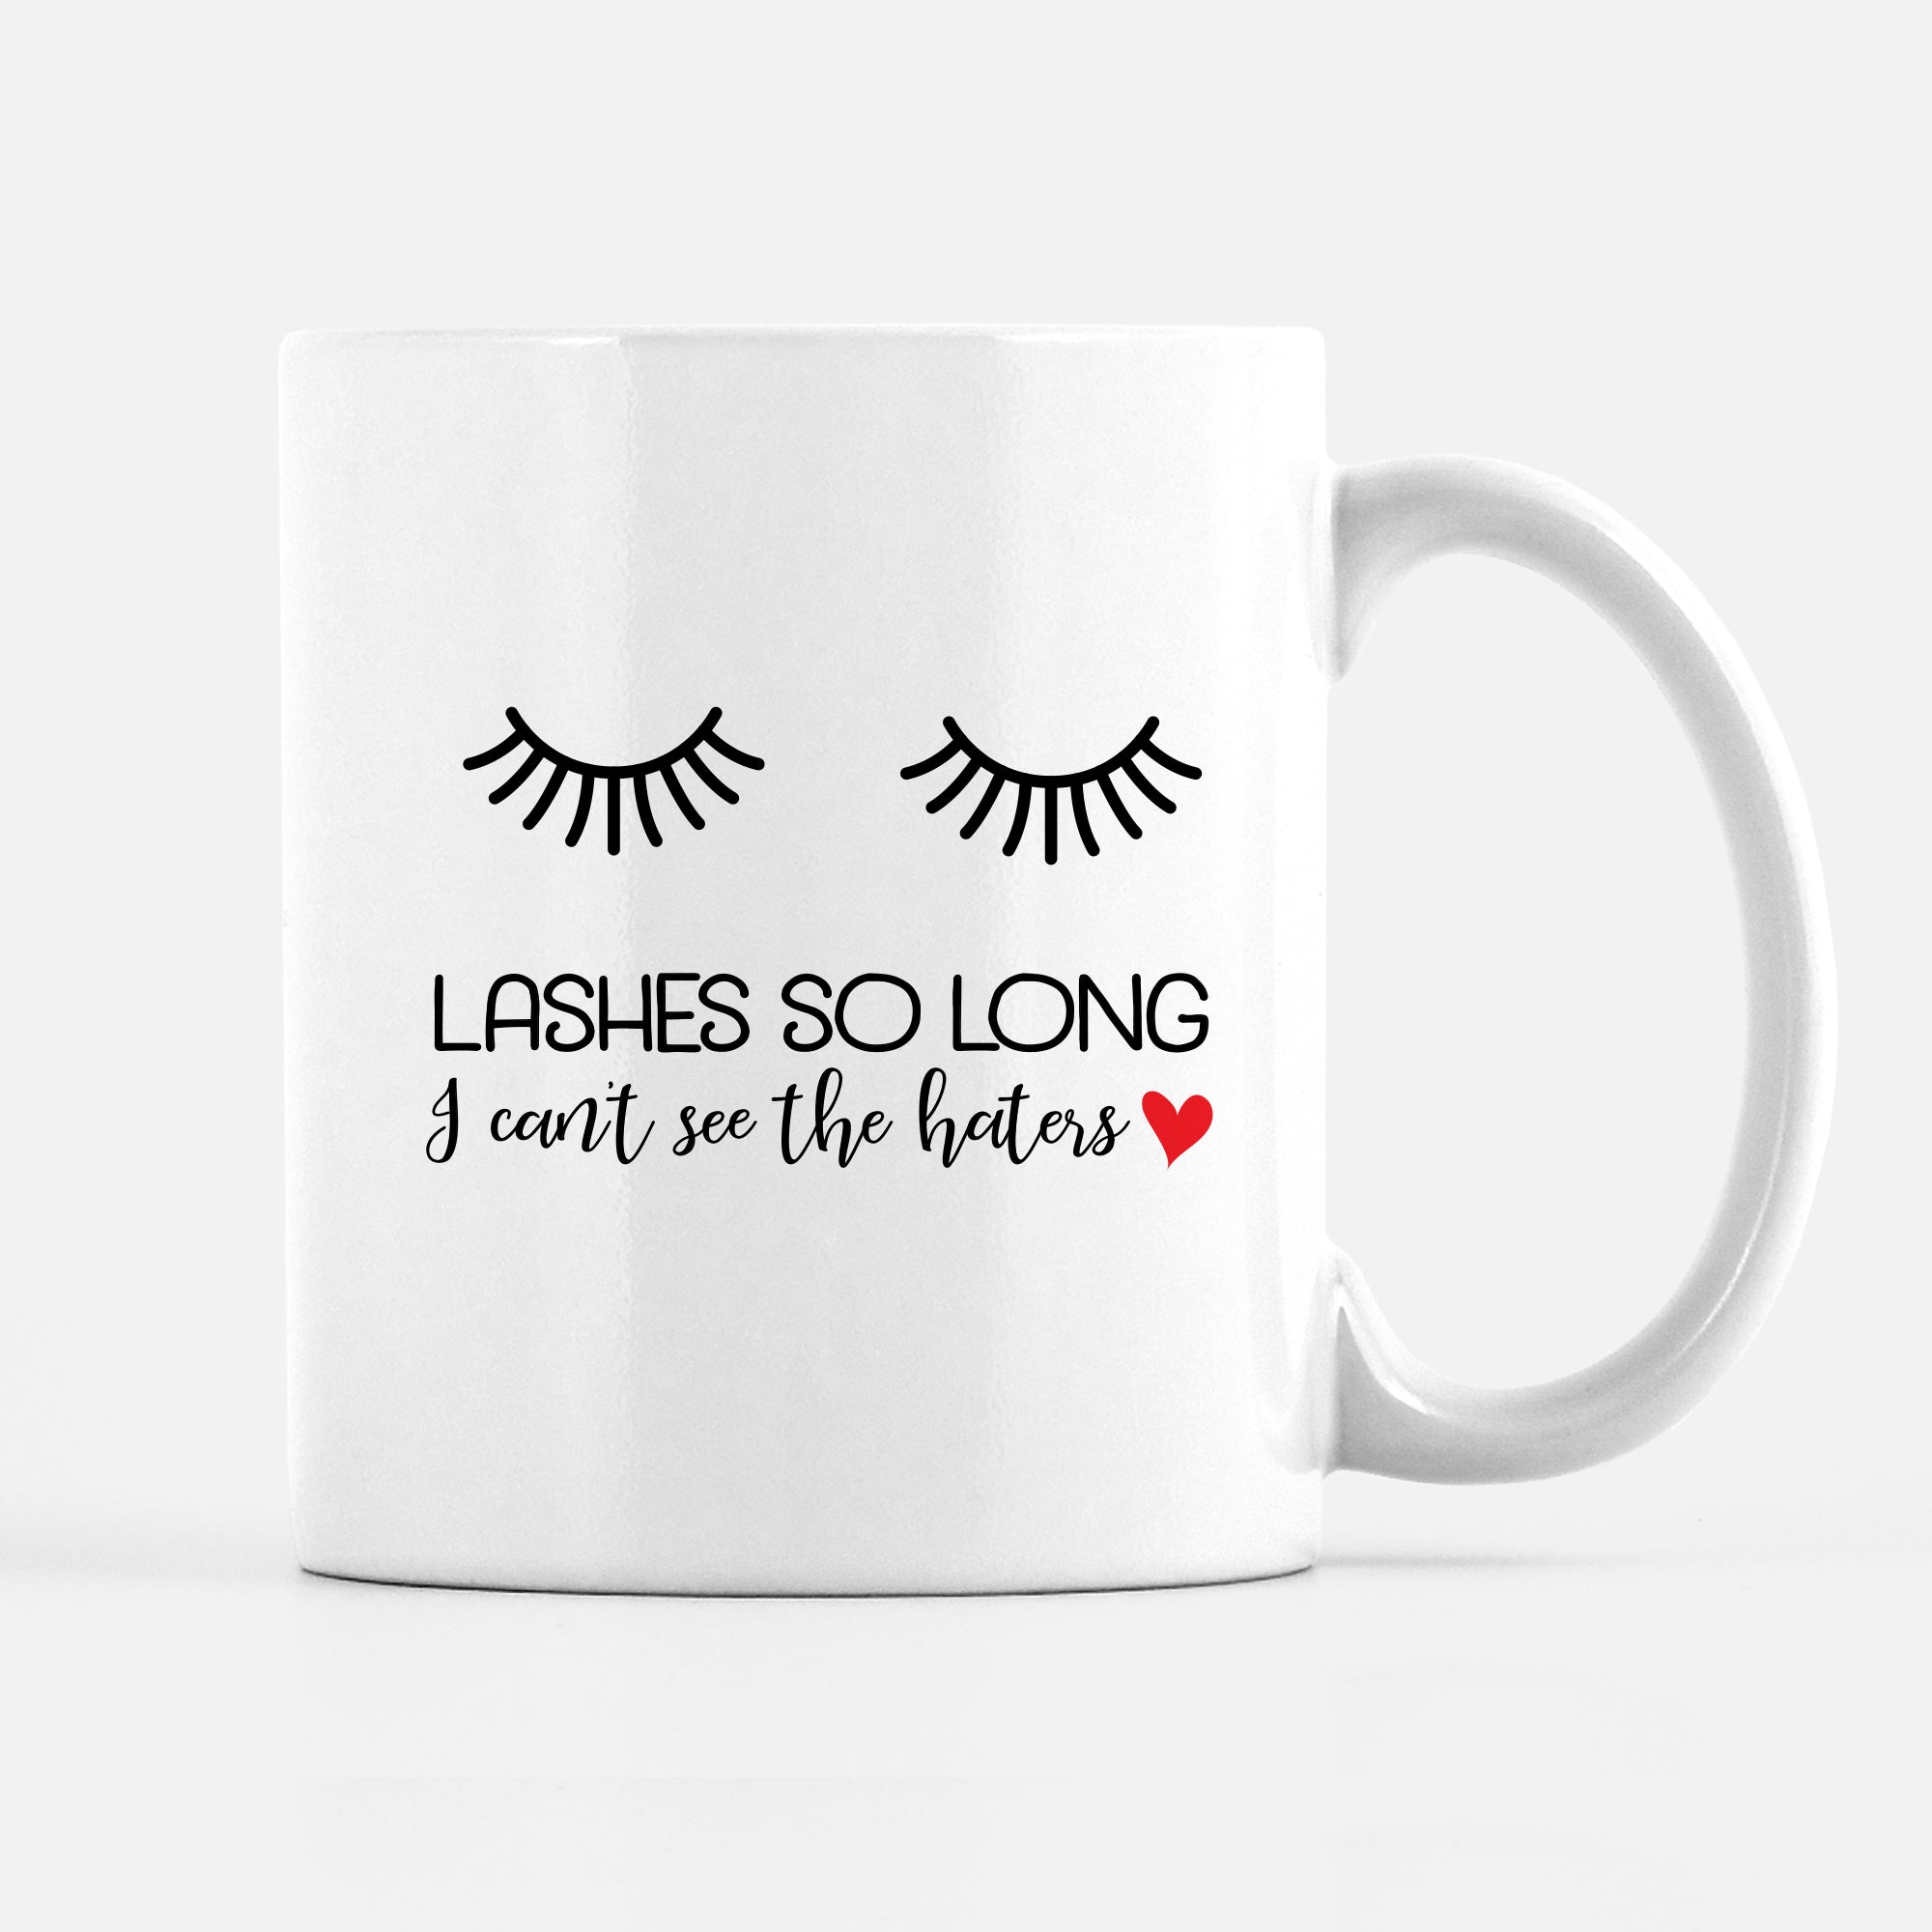 Lashes so long I can't see the haters Mug, PIPSY.COM